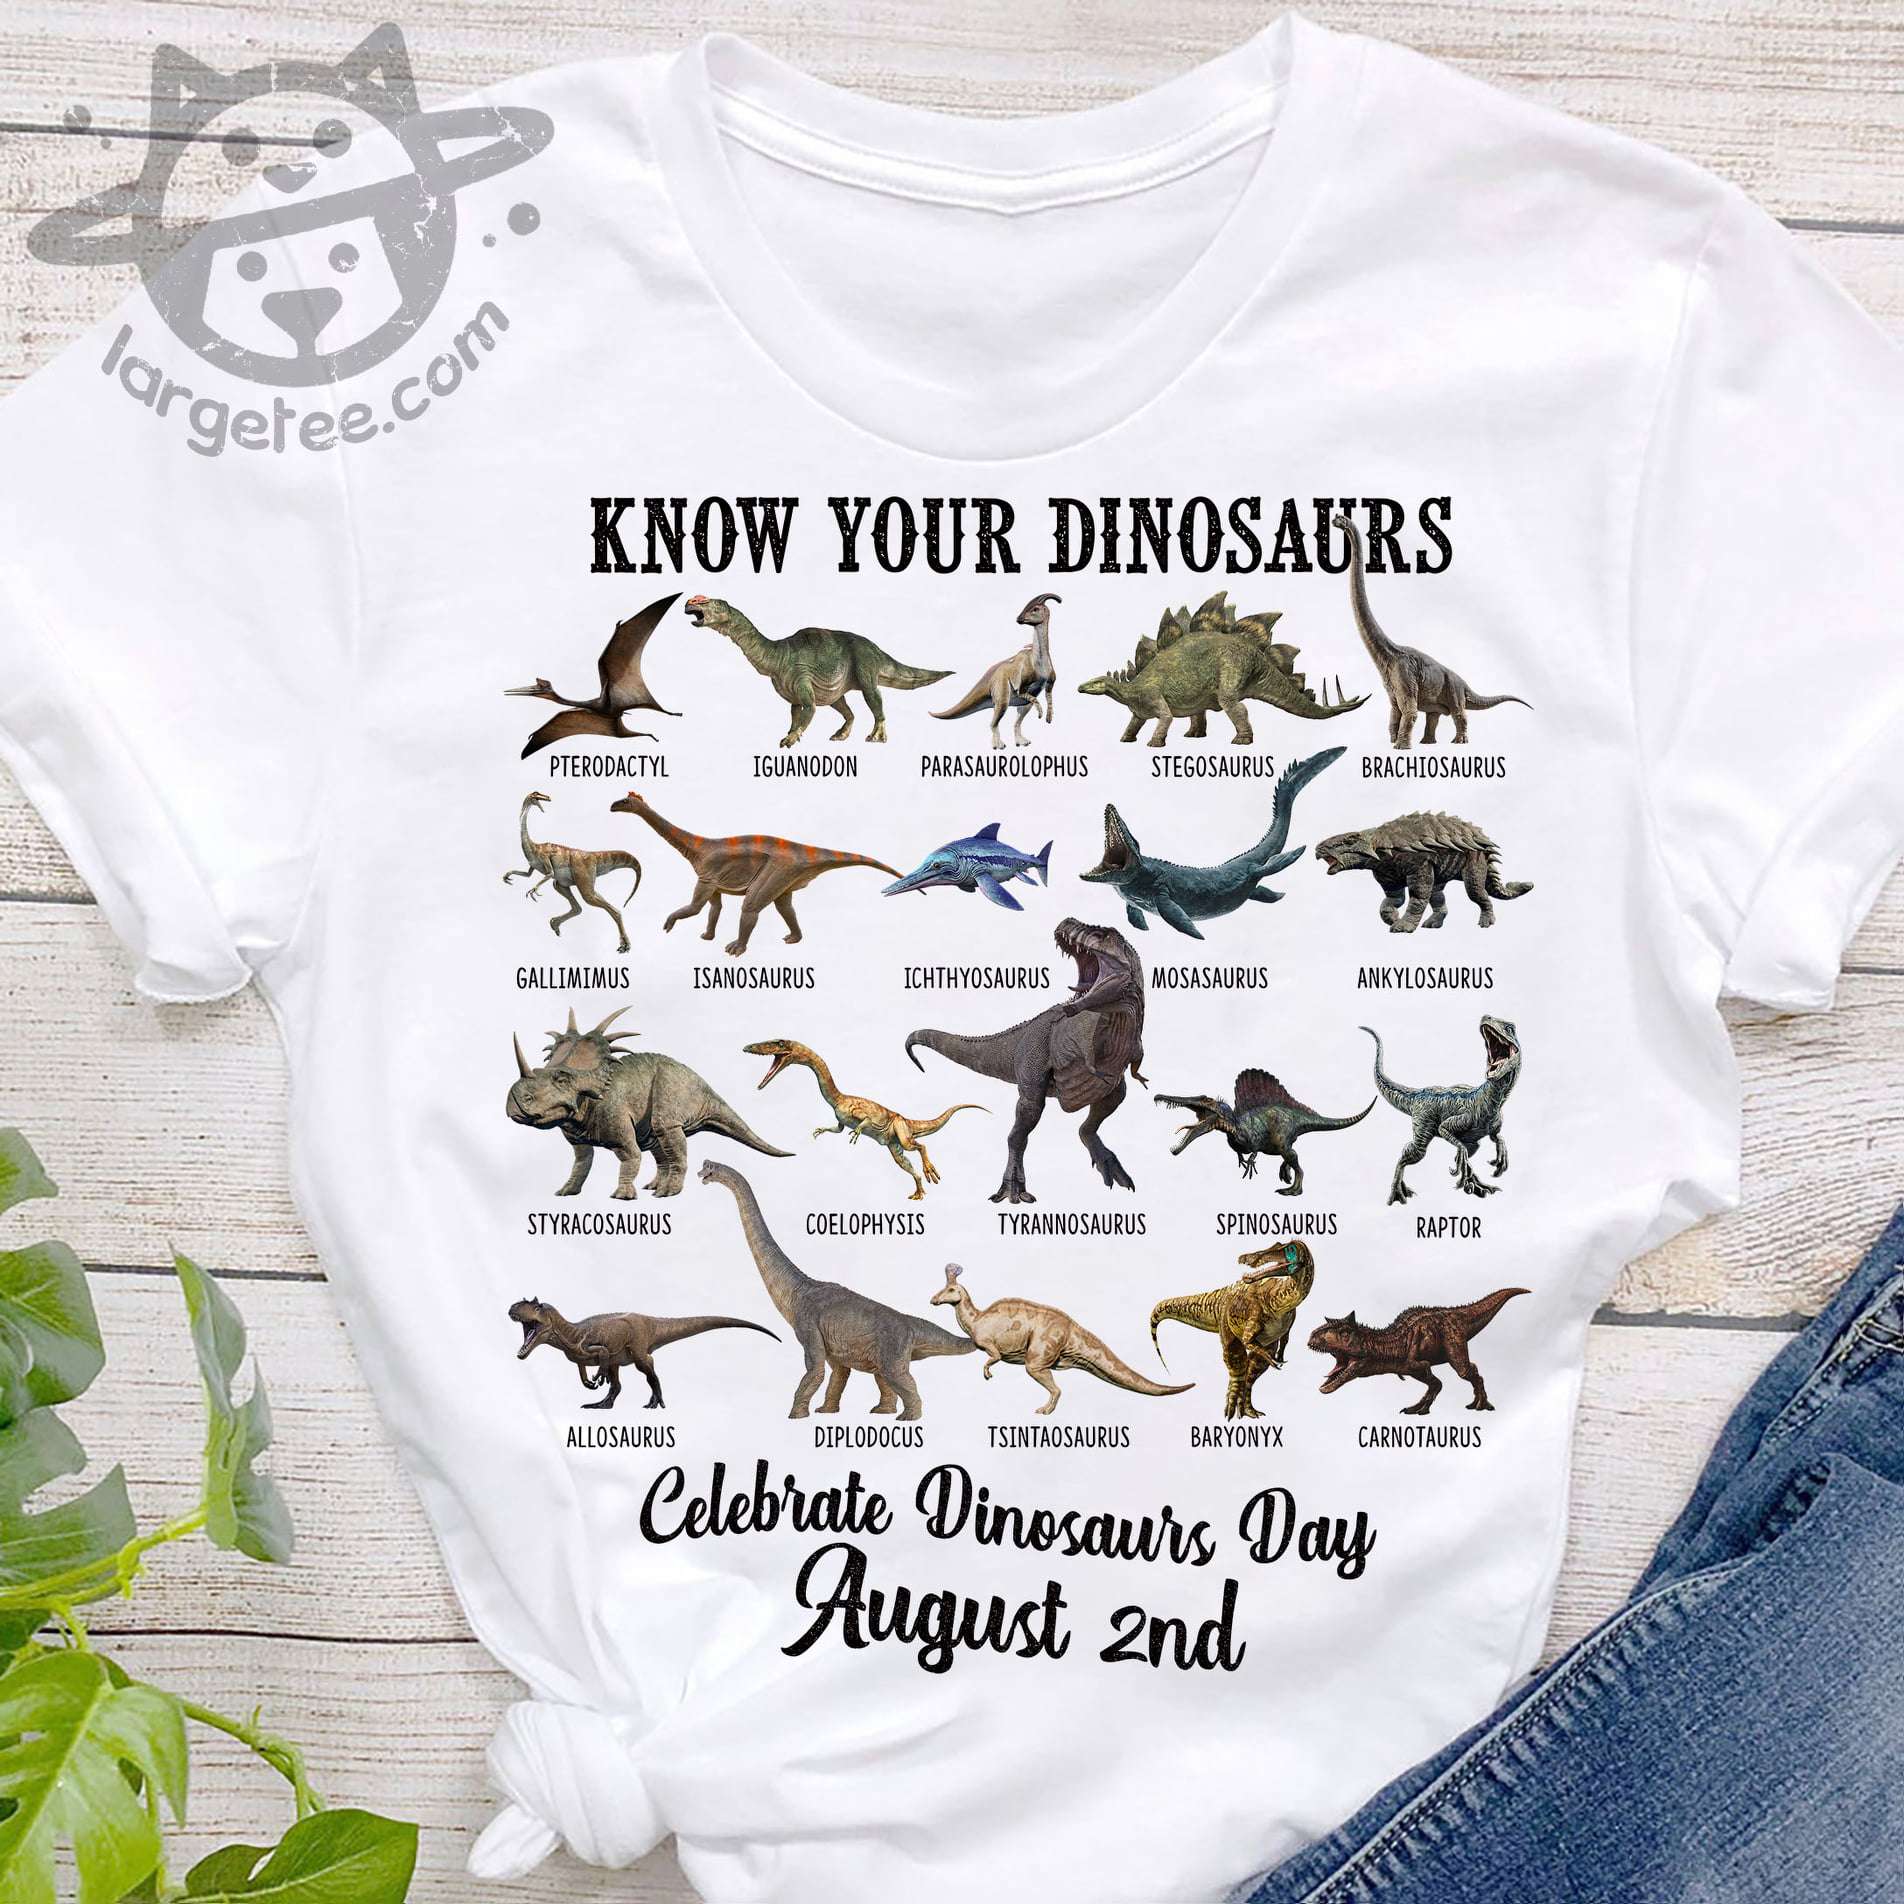 Know your dinosaurs celebrate dinosaurs day august 2nd